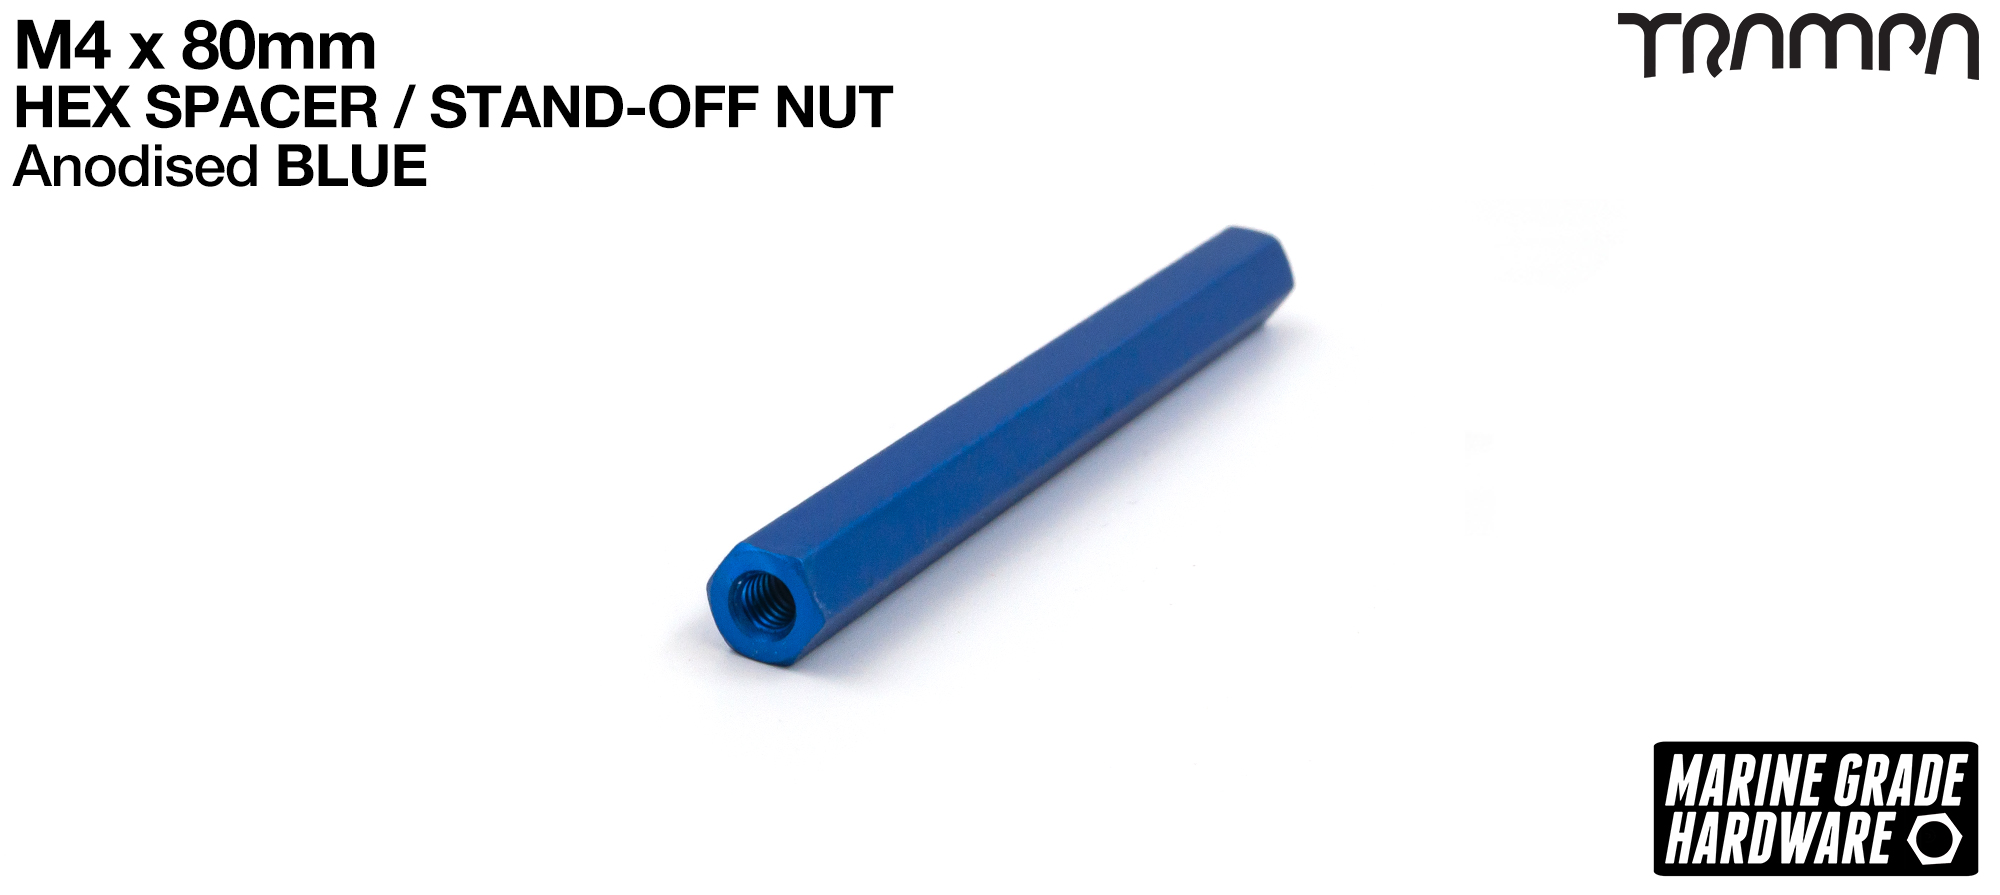 M4 x 80mm Aluminium Threaded Spacer Nut Used for assembling the BEAST Battery Boxes - BLUE